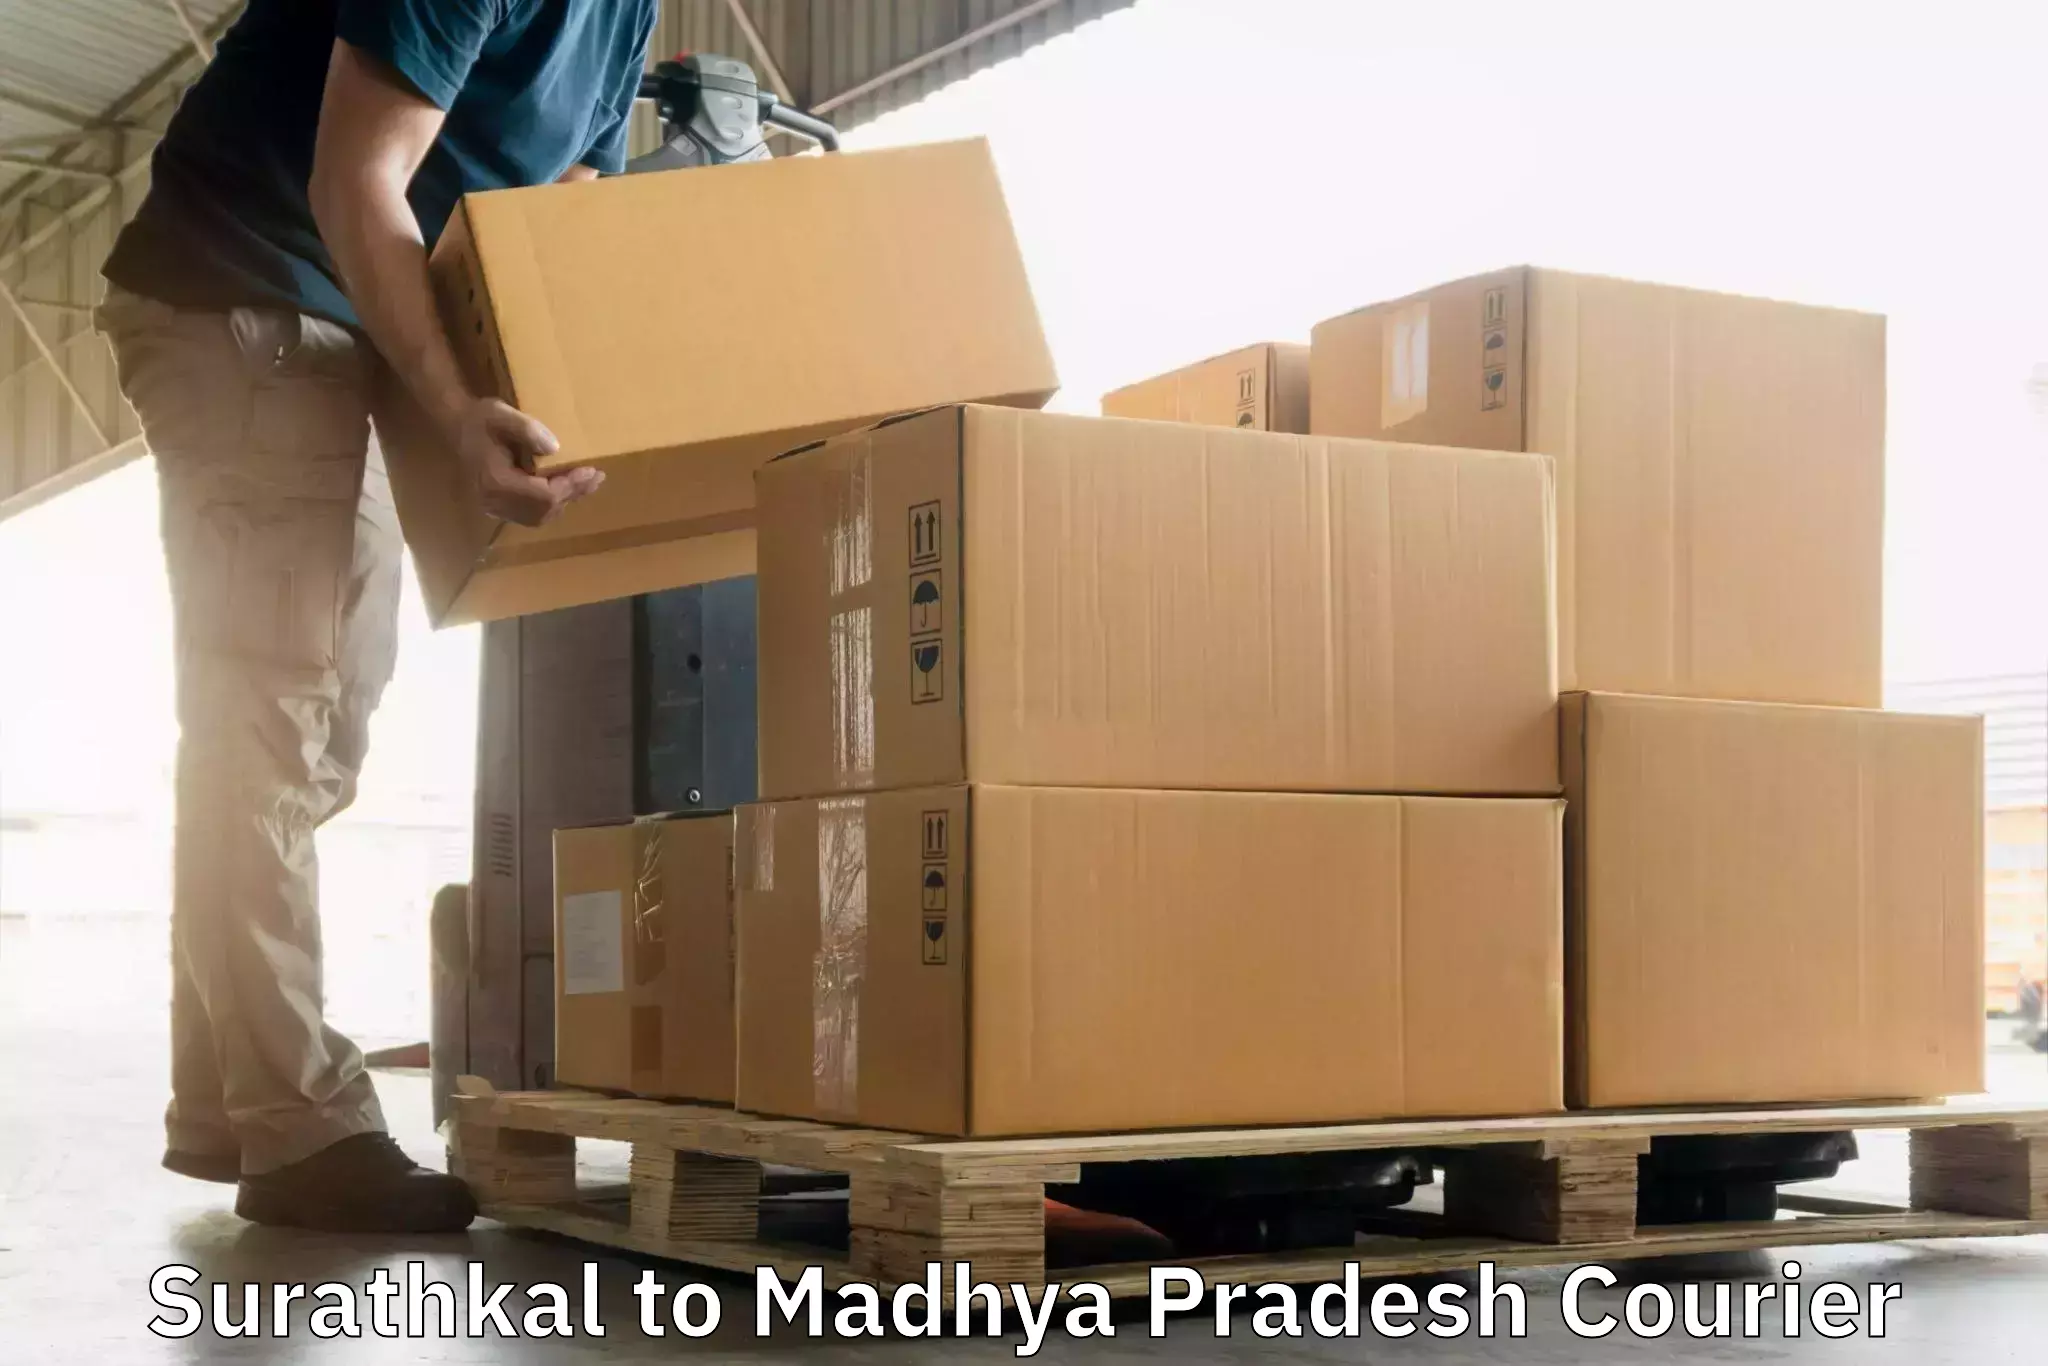 Full-service courier options Surathkal to Guna